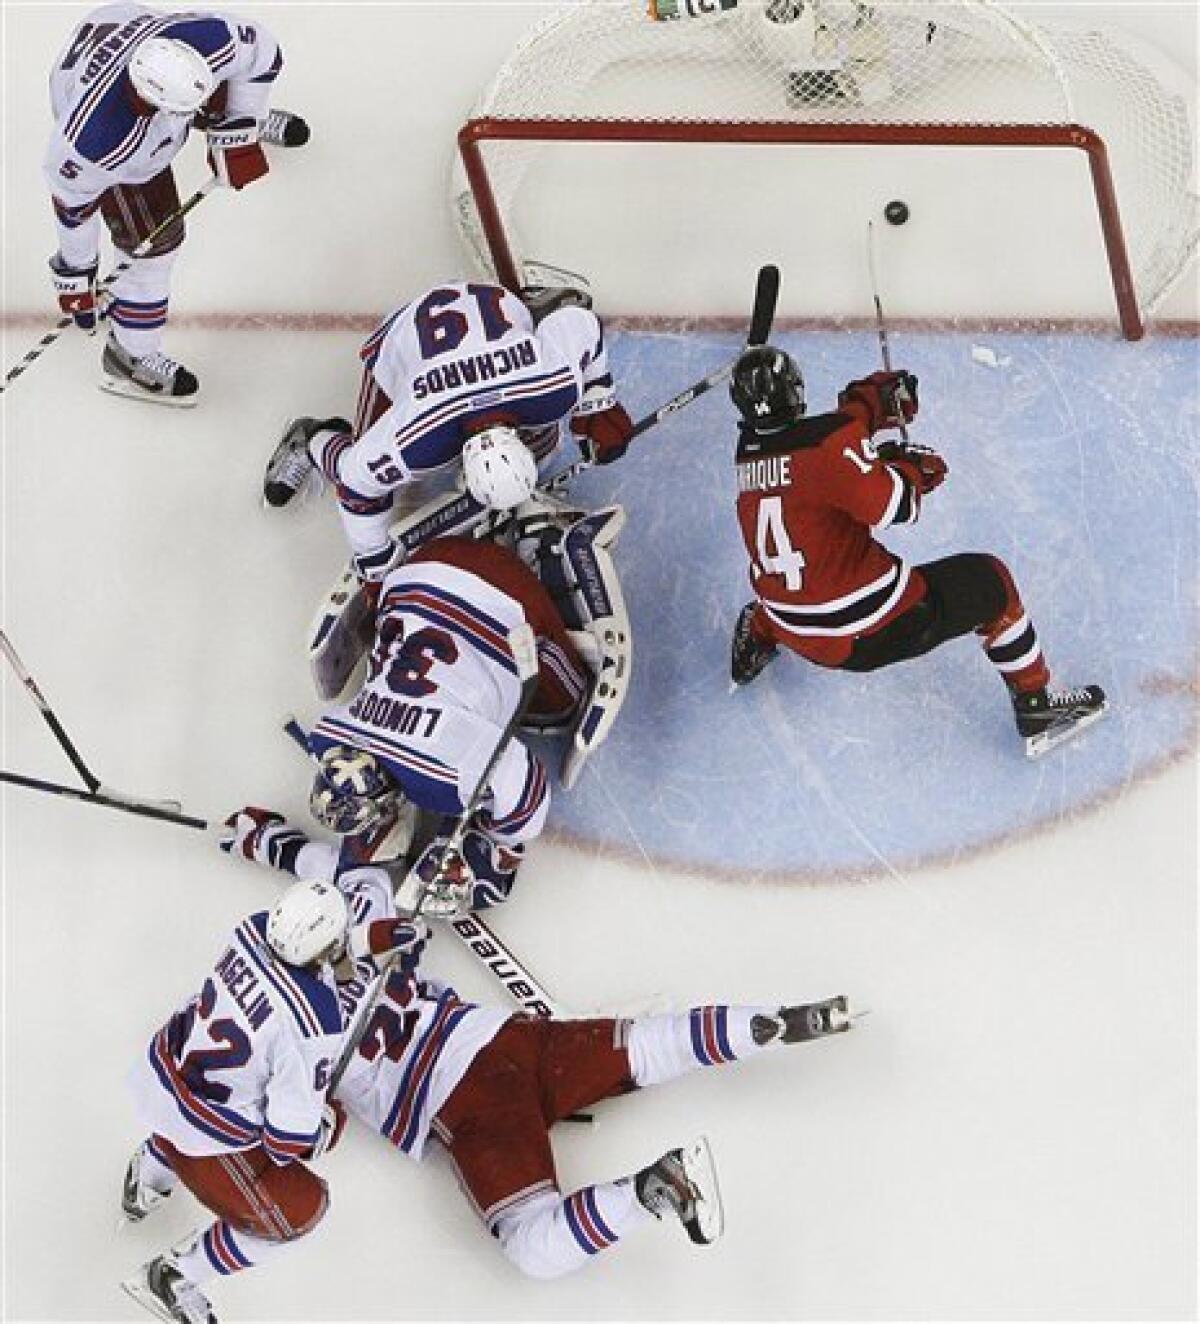 May 25 2012: The New Jersey Devils' and New York Rangers' during